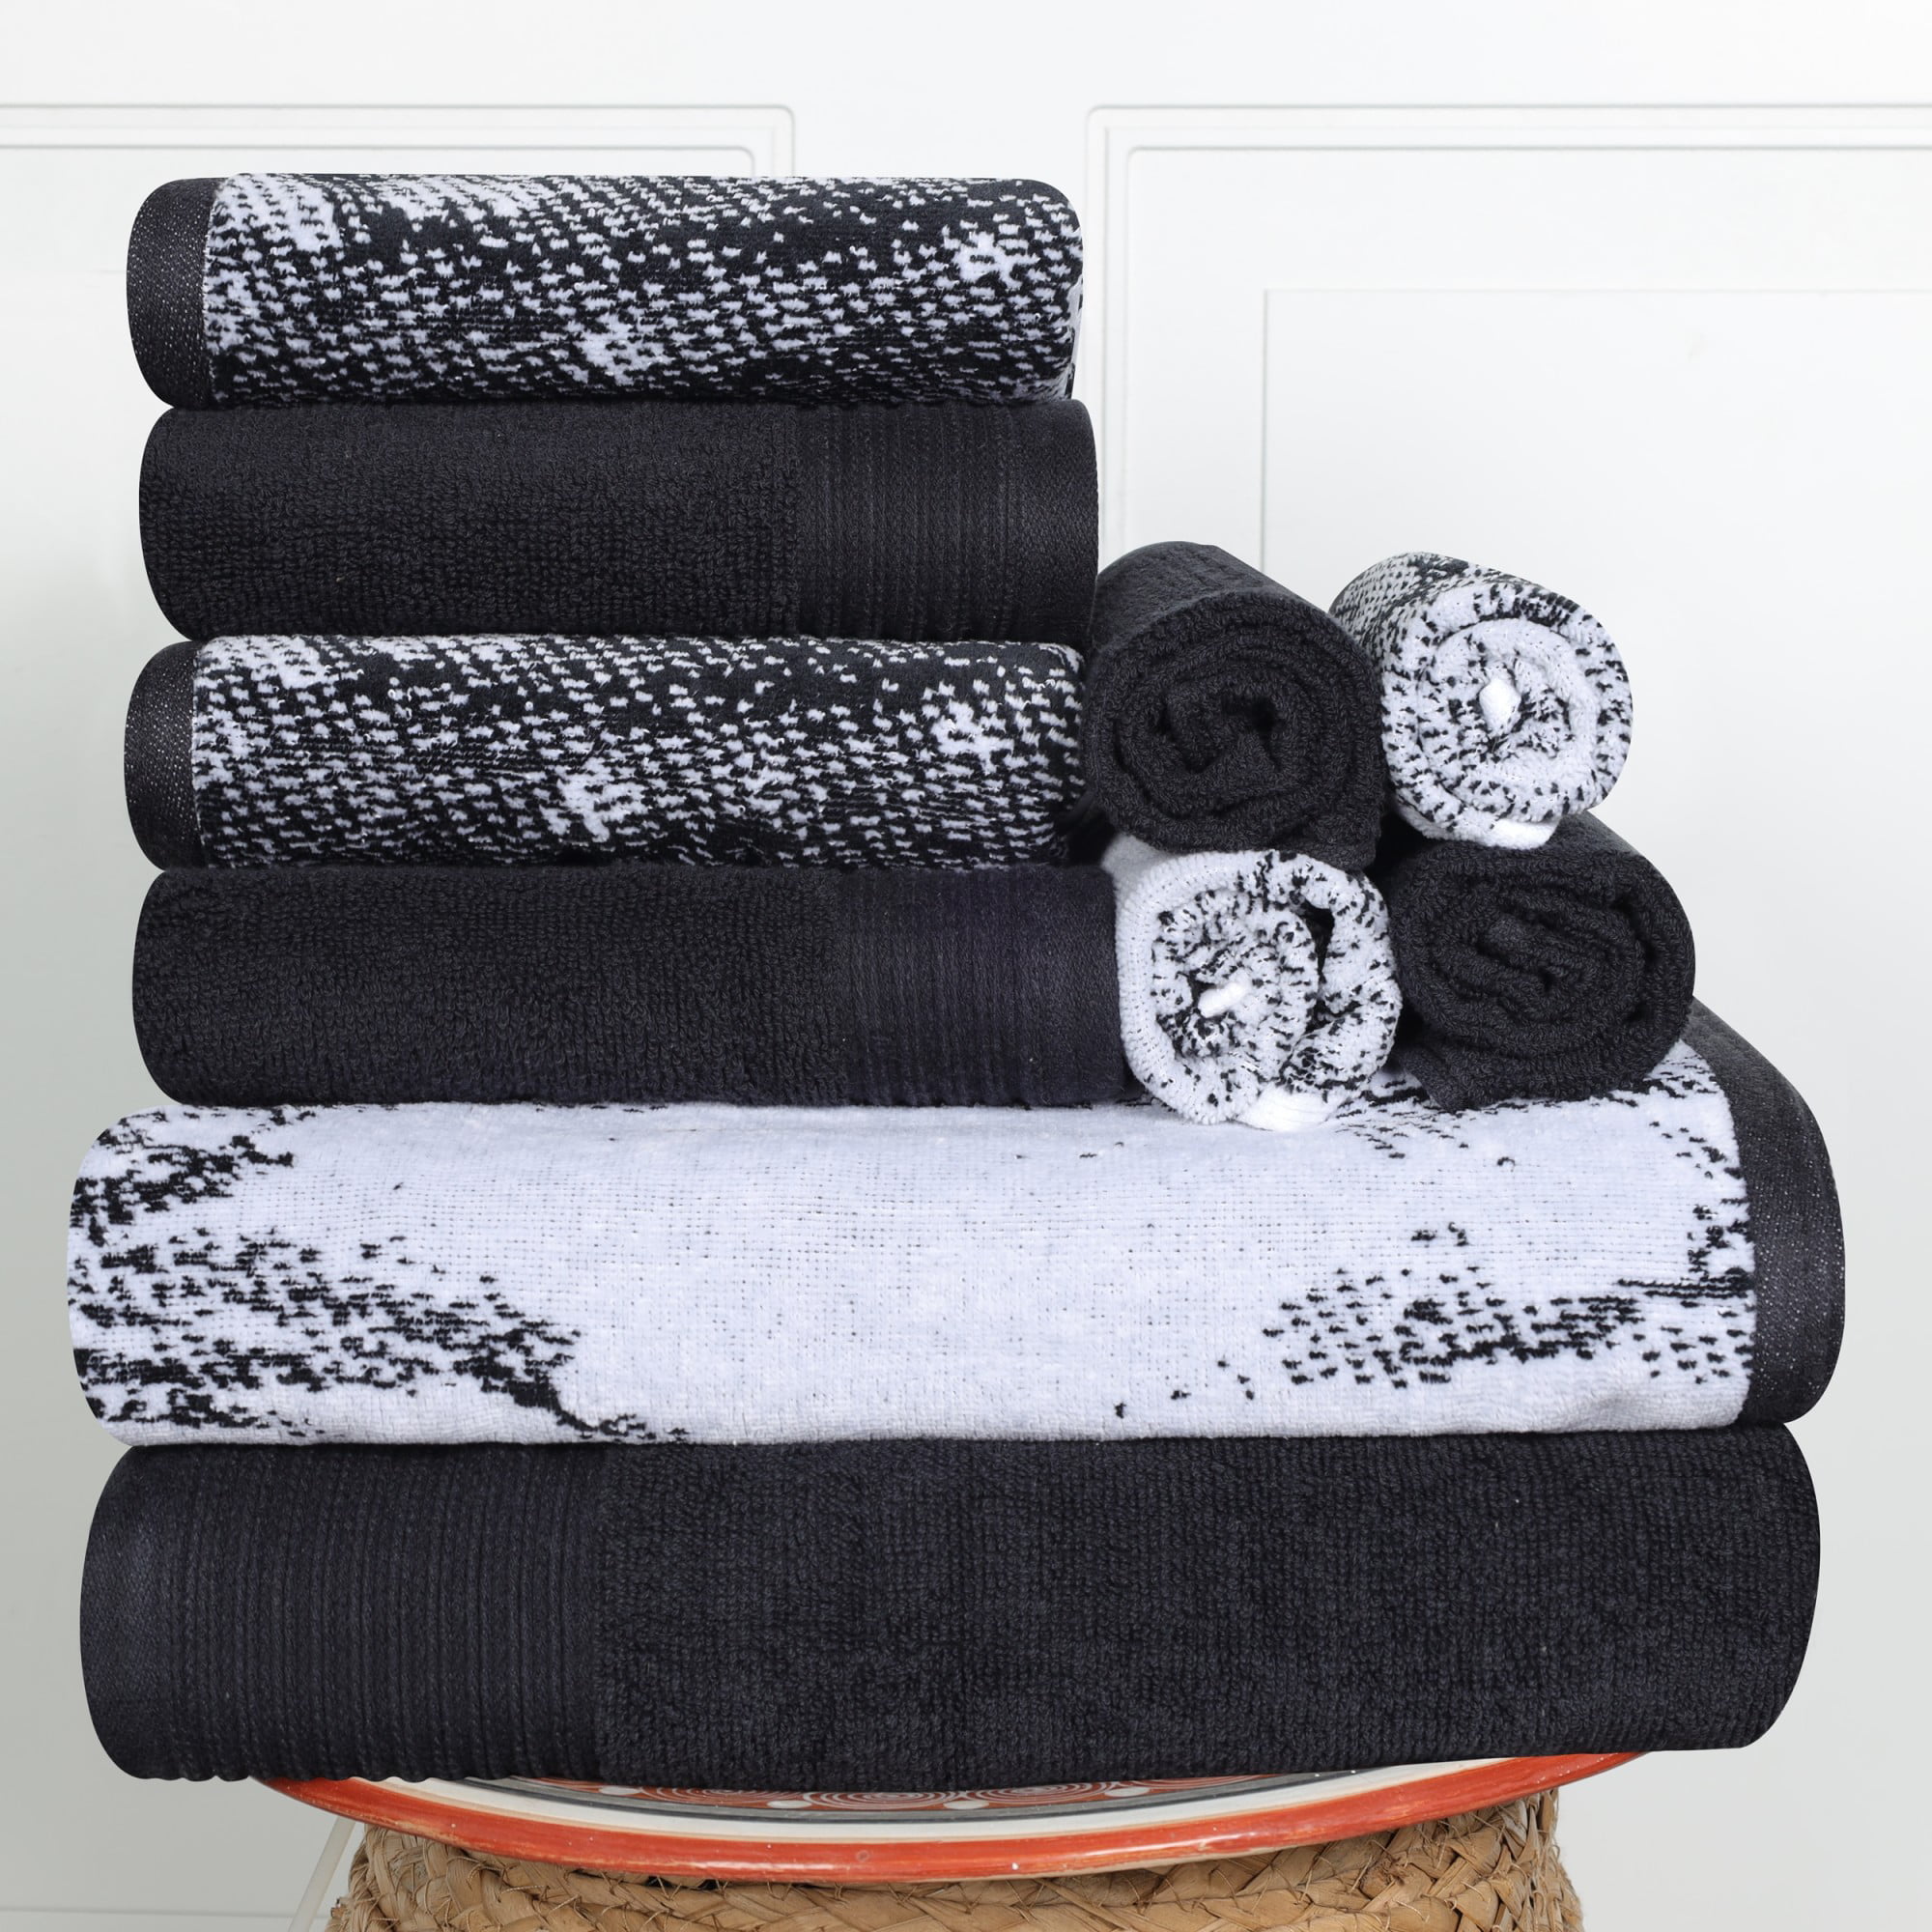 Details about   Soft and Absorbent Facial Washcloth Towels with Cut Out Loop for Hanging 4 